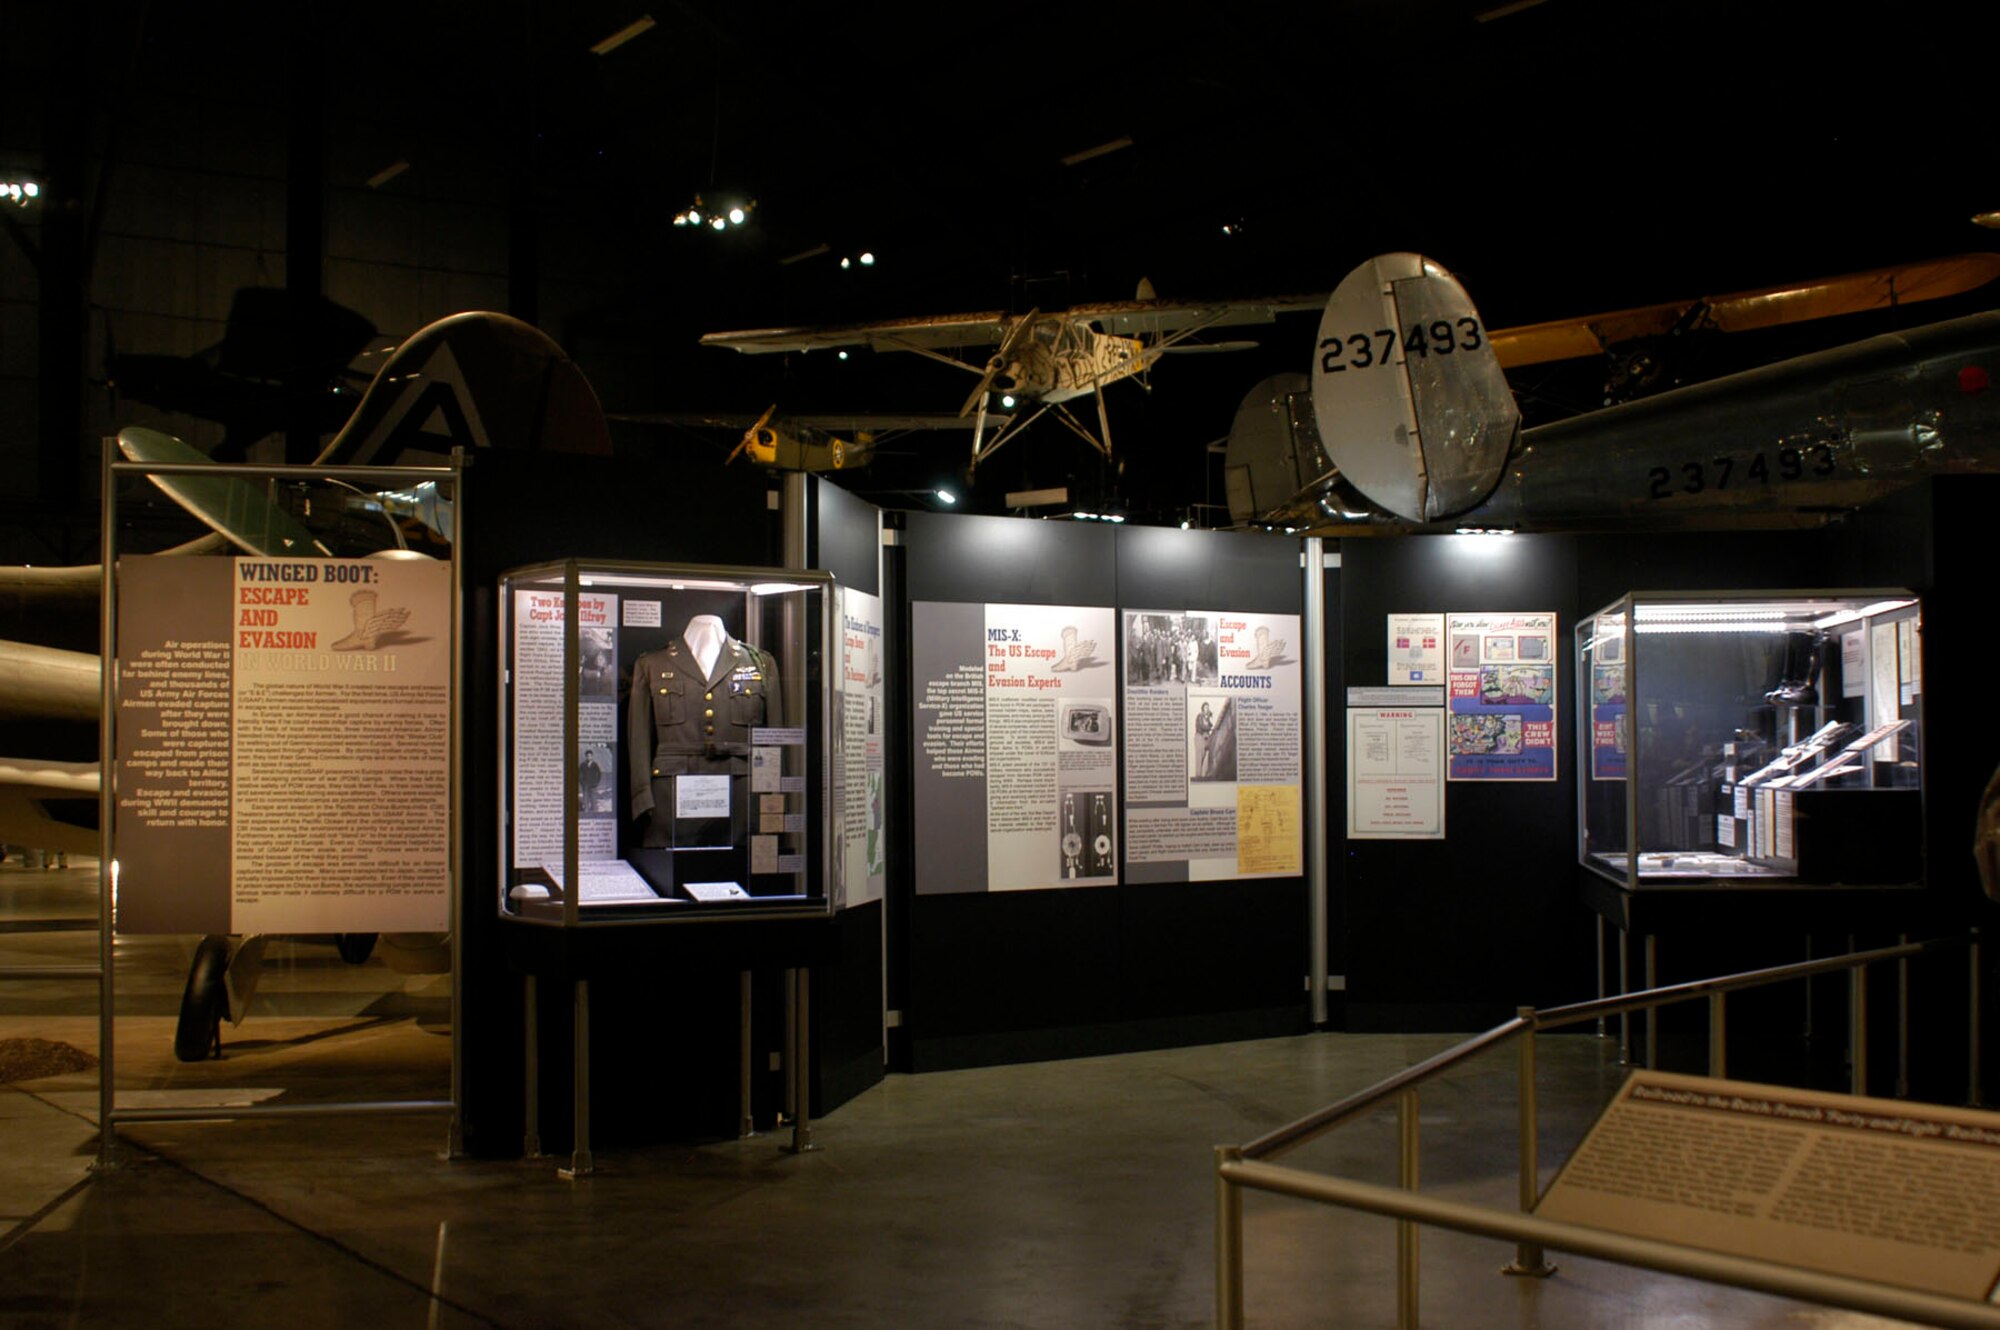 DAYTON, Ohio - The "Winged Boot: Escape and Evasion in World War II" exhibit on display in the World War II Gallery at the National Museum of the U.S. Air Force. (U.S. Air Force photo)